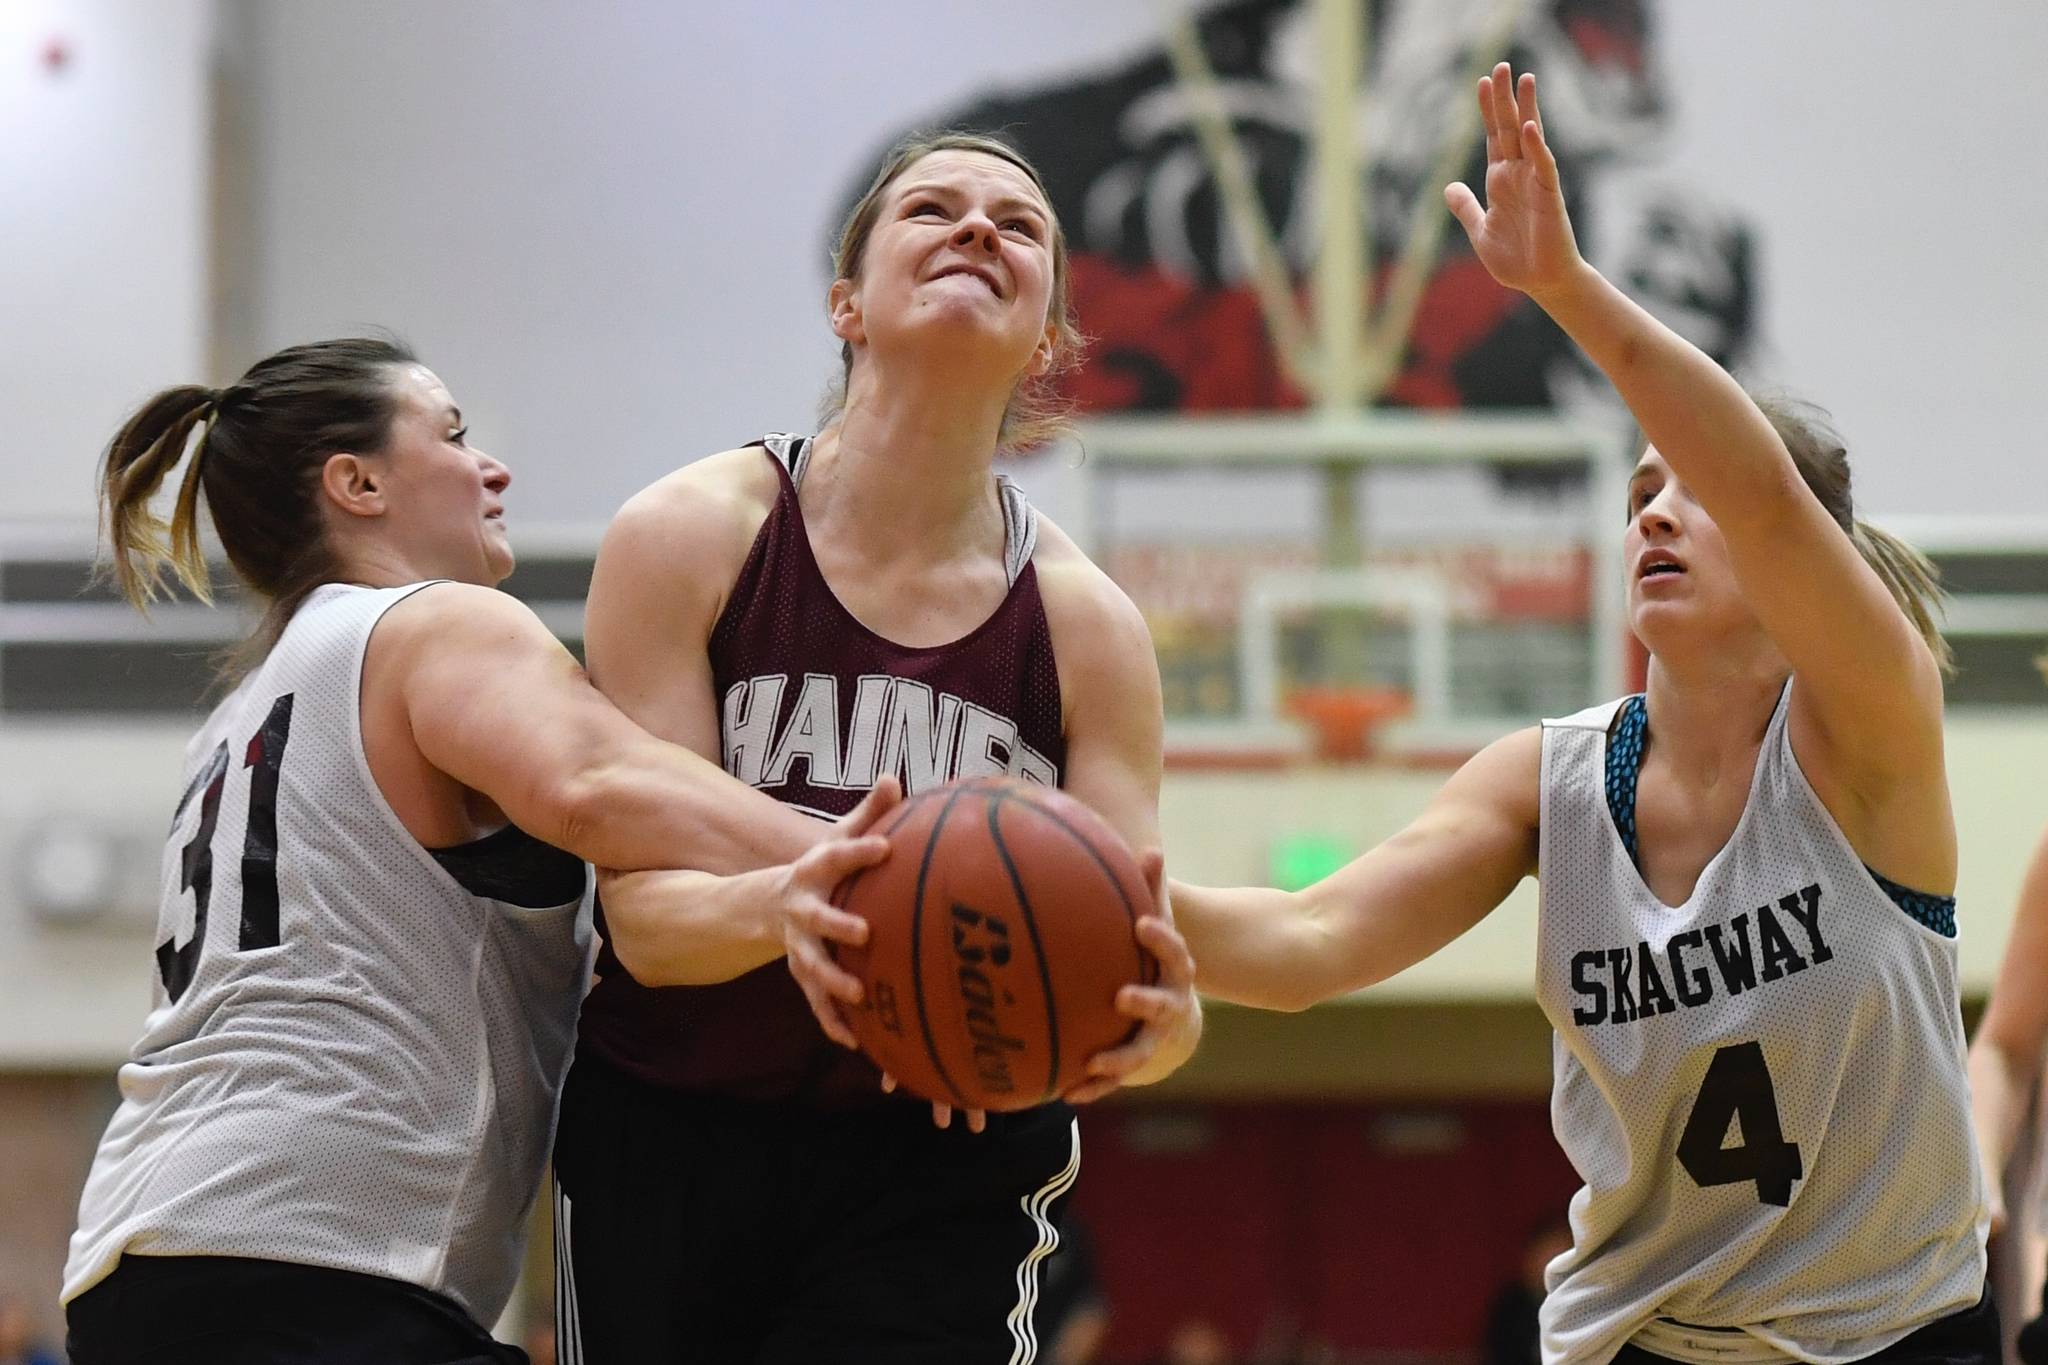 Haines’ Alisa Beske , center, is fouled by Skagway’s Tiffanie Ames, left, in the women’s final at the Gold Medal Basketball Tournament on Saturday, March 23, 2019. (Michael Penn | Juneau Empire)